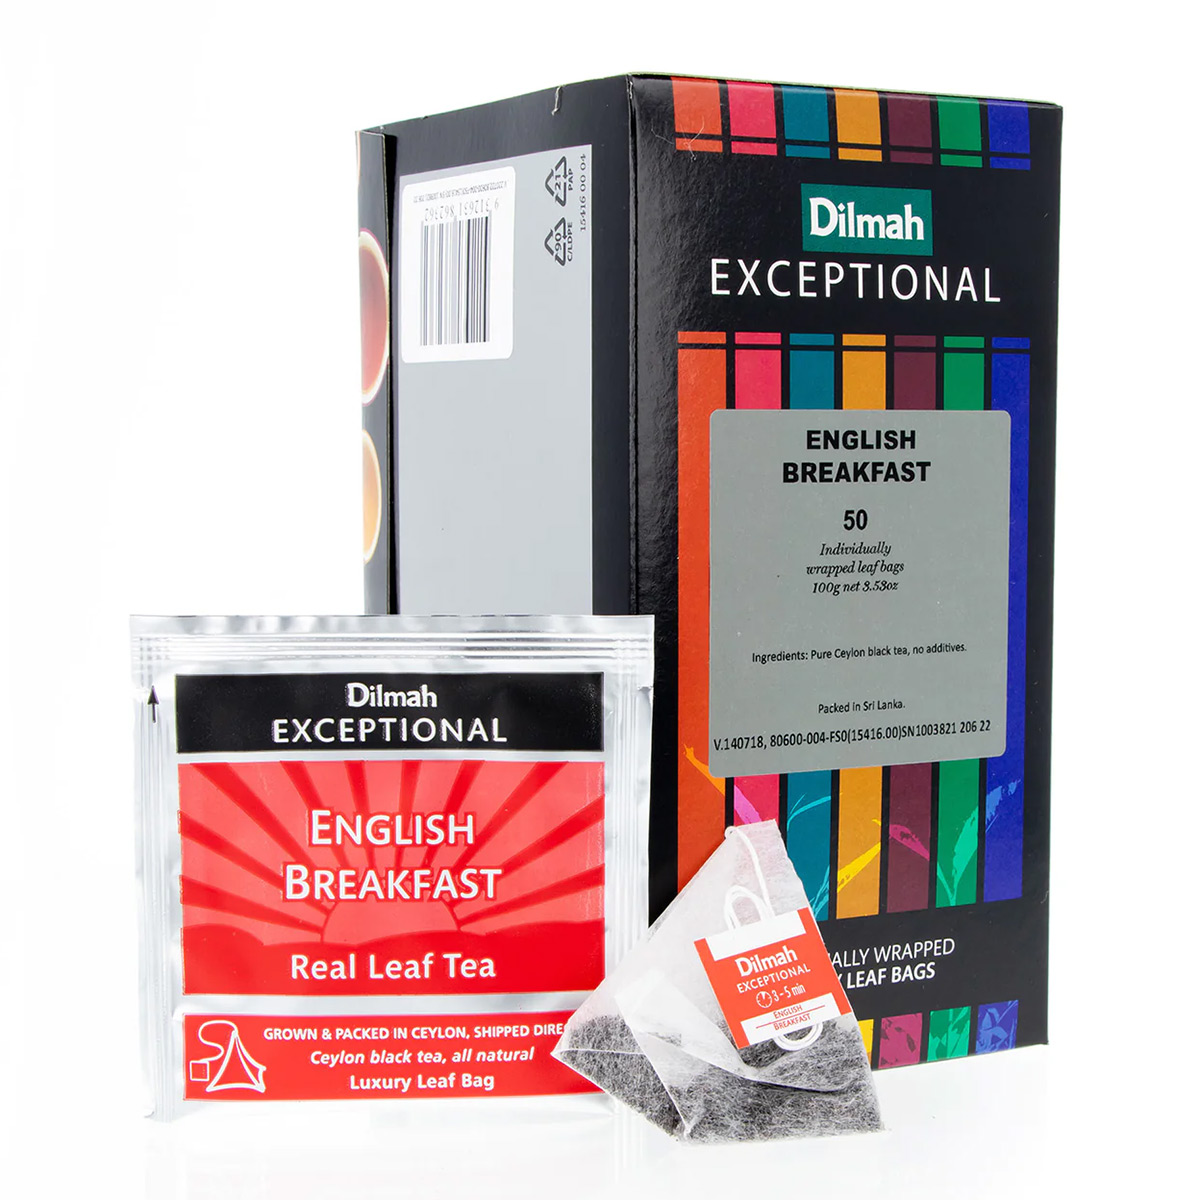 consumables-hospitality-beverage-food-dilmah-exceptionals-english-breakfast-tea-bag-50-luxury-pyramid-tea-bag-range-freshness-and-authenticity-of-flavour-vjs-distributors-hawkes-bay-nz-80600004